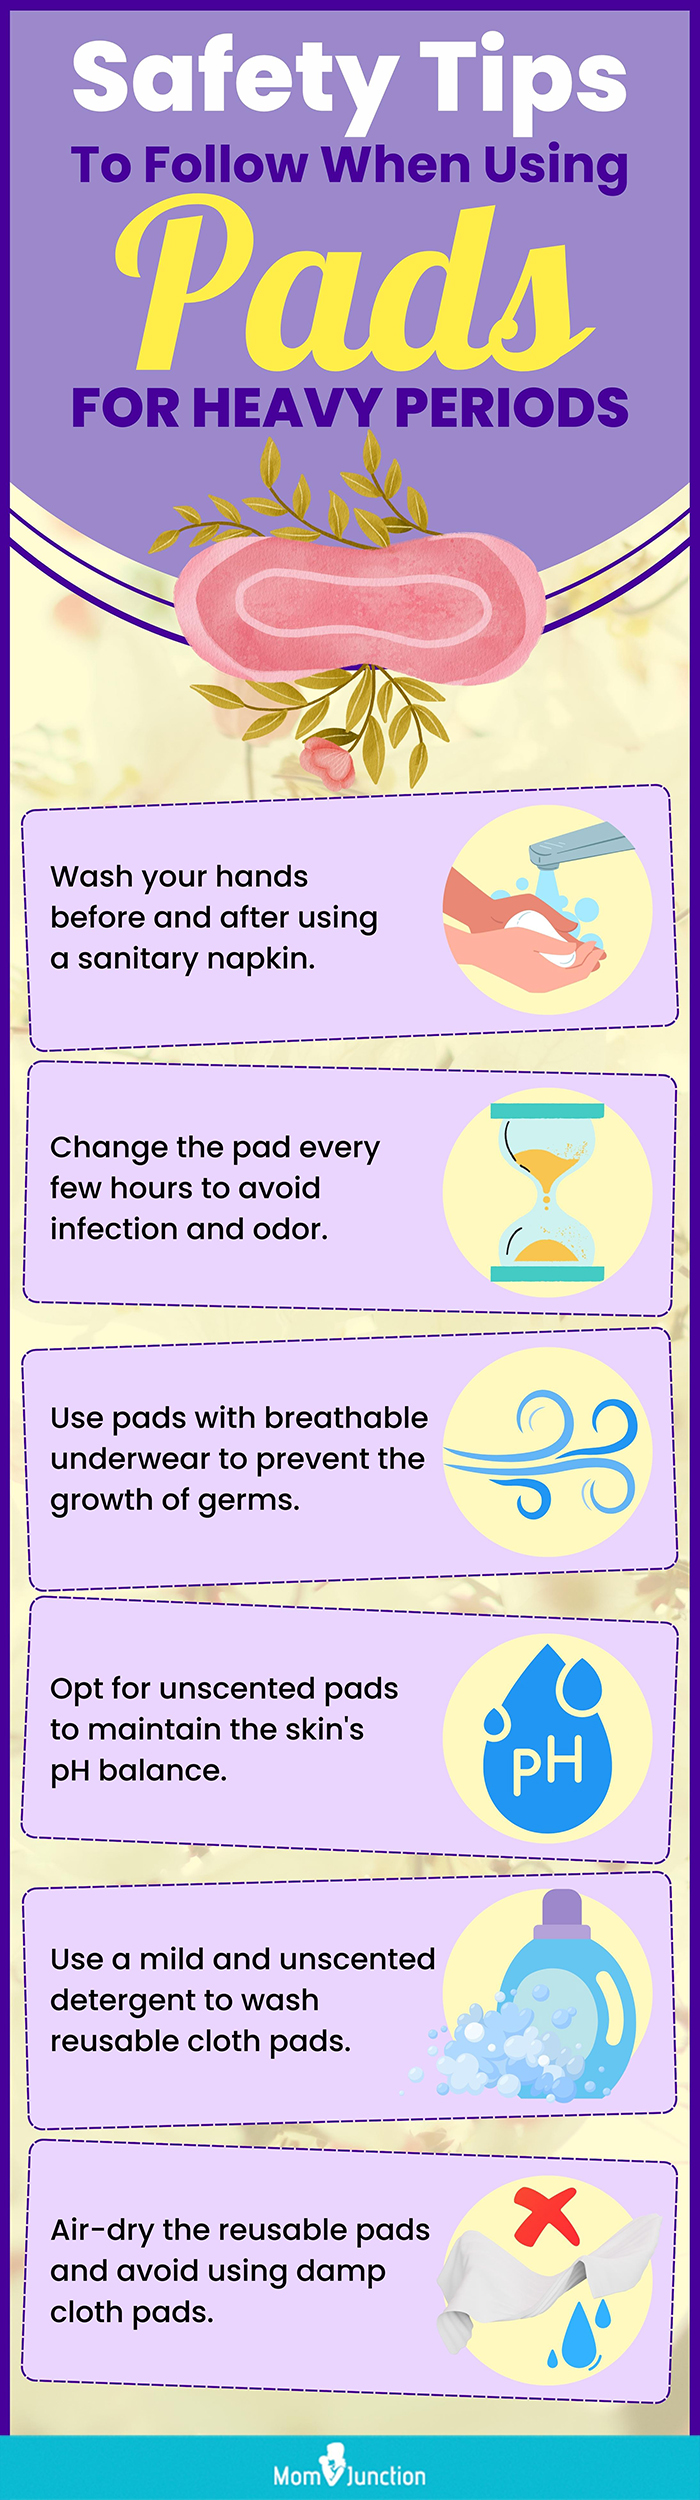 Safety Tips To Follow When Using Pads For Heavy Periods